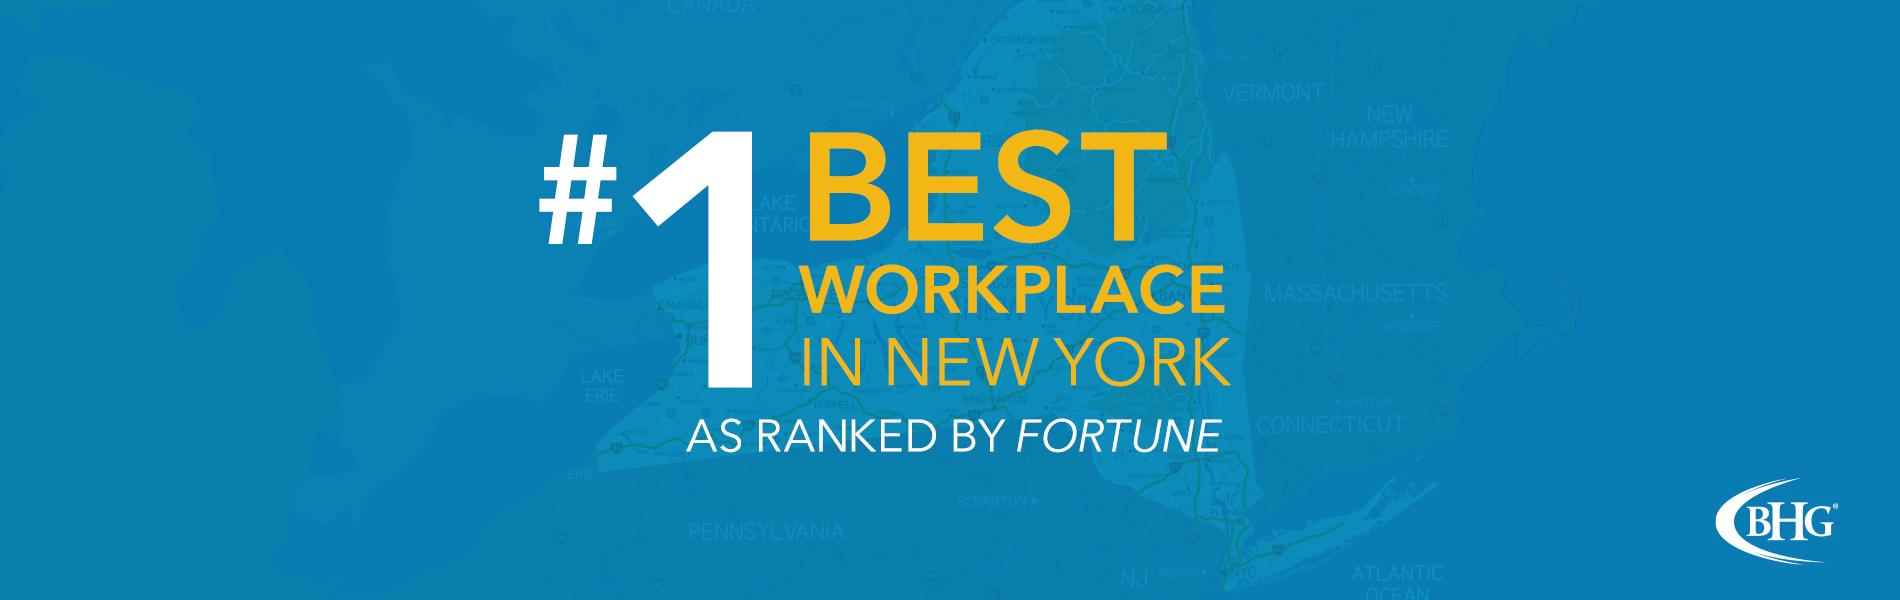 #1 Best Workplace in New York as Ranked by Fortune